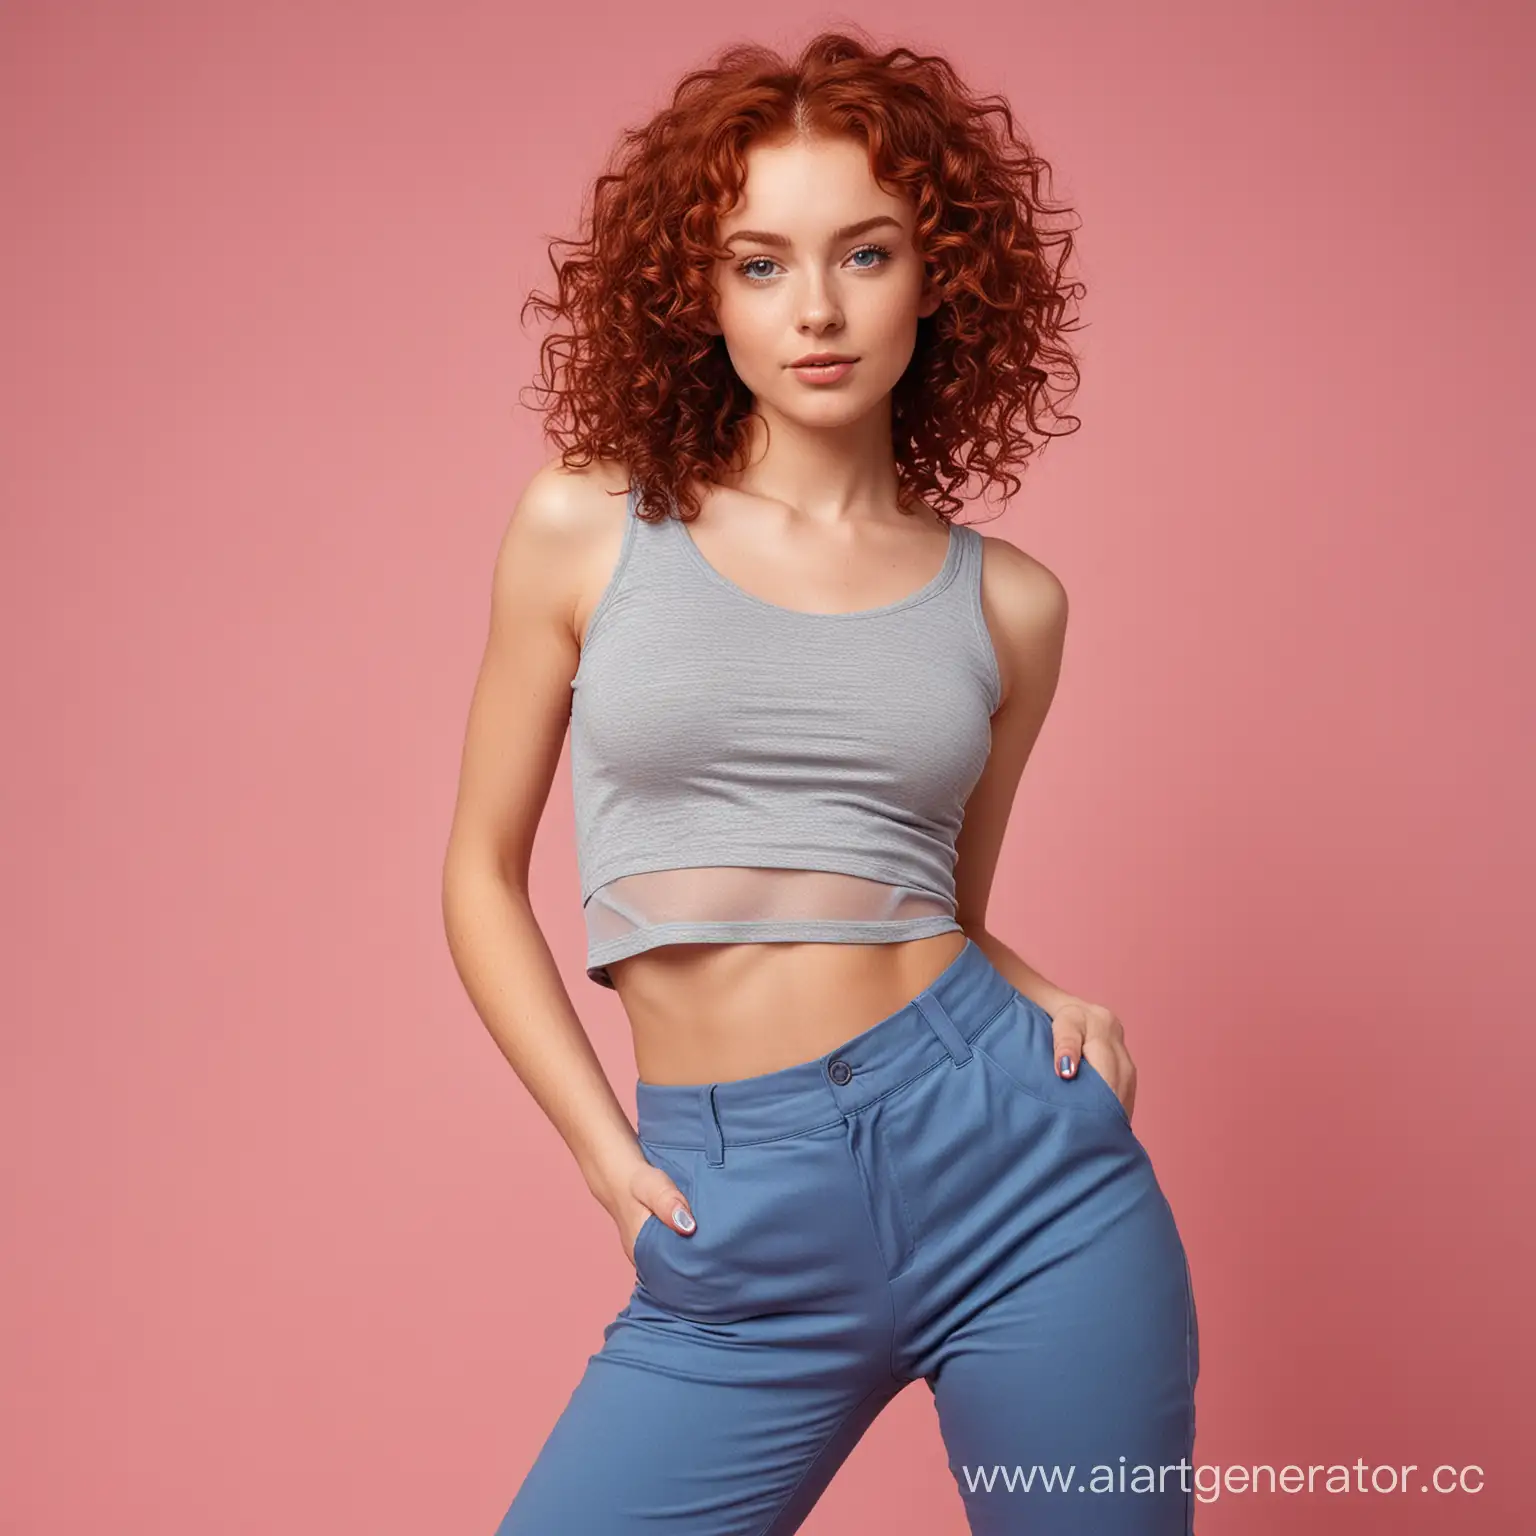 Portrait-of-a-Girl-with-Curly-Red-Hair-and-Gray-Eyes-on-Pink-Background